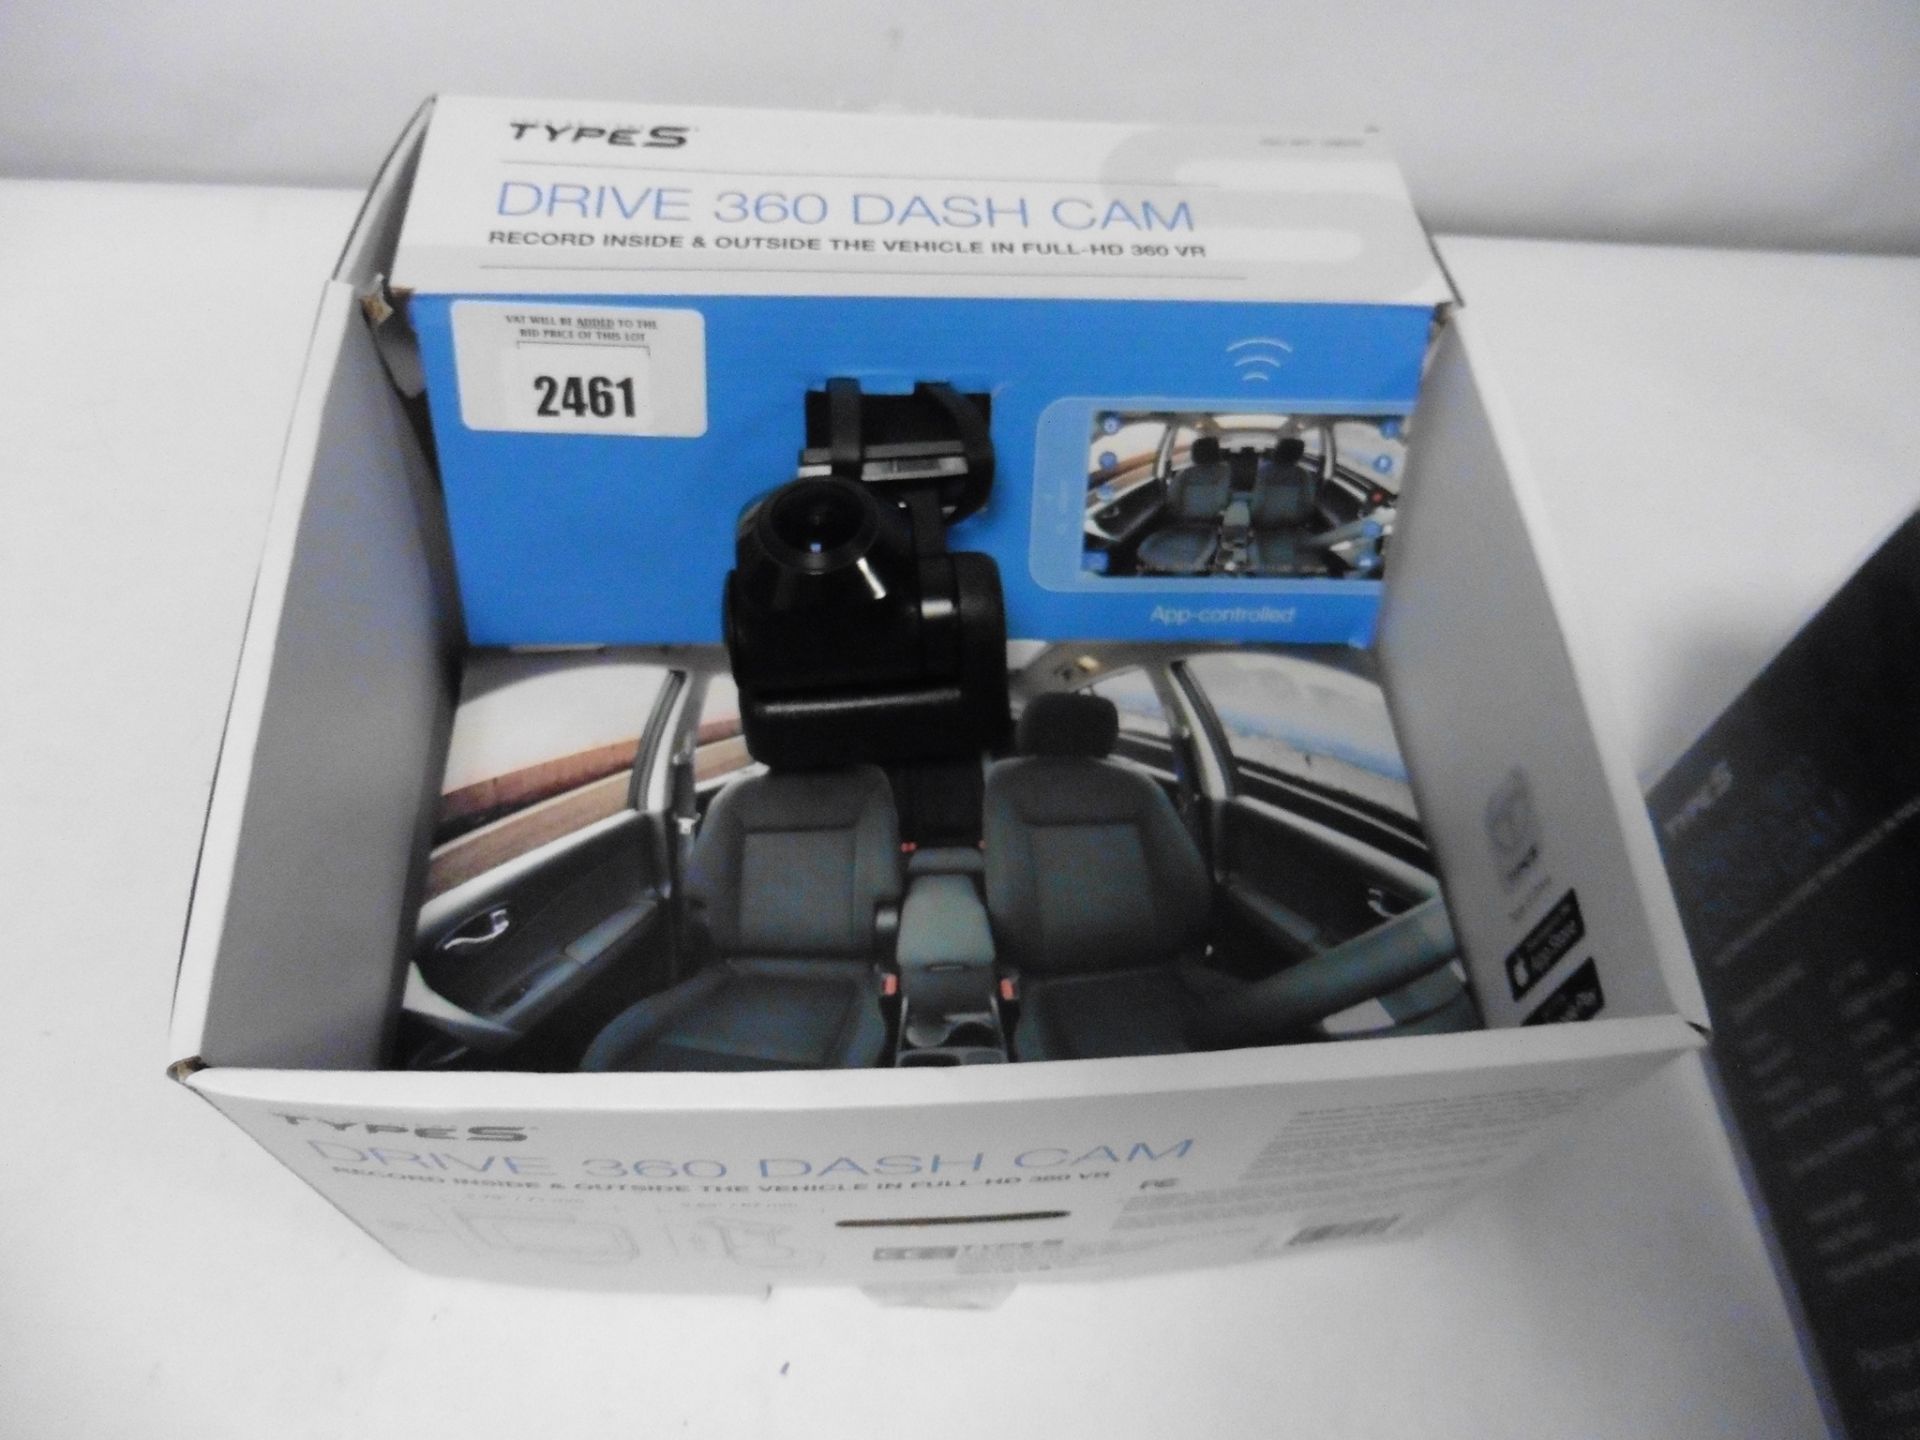 Type S Drive 360 Dash Cam with box